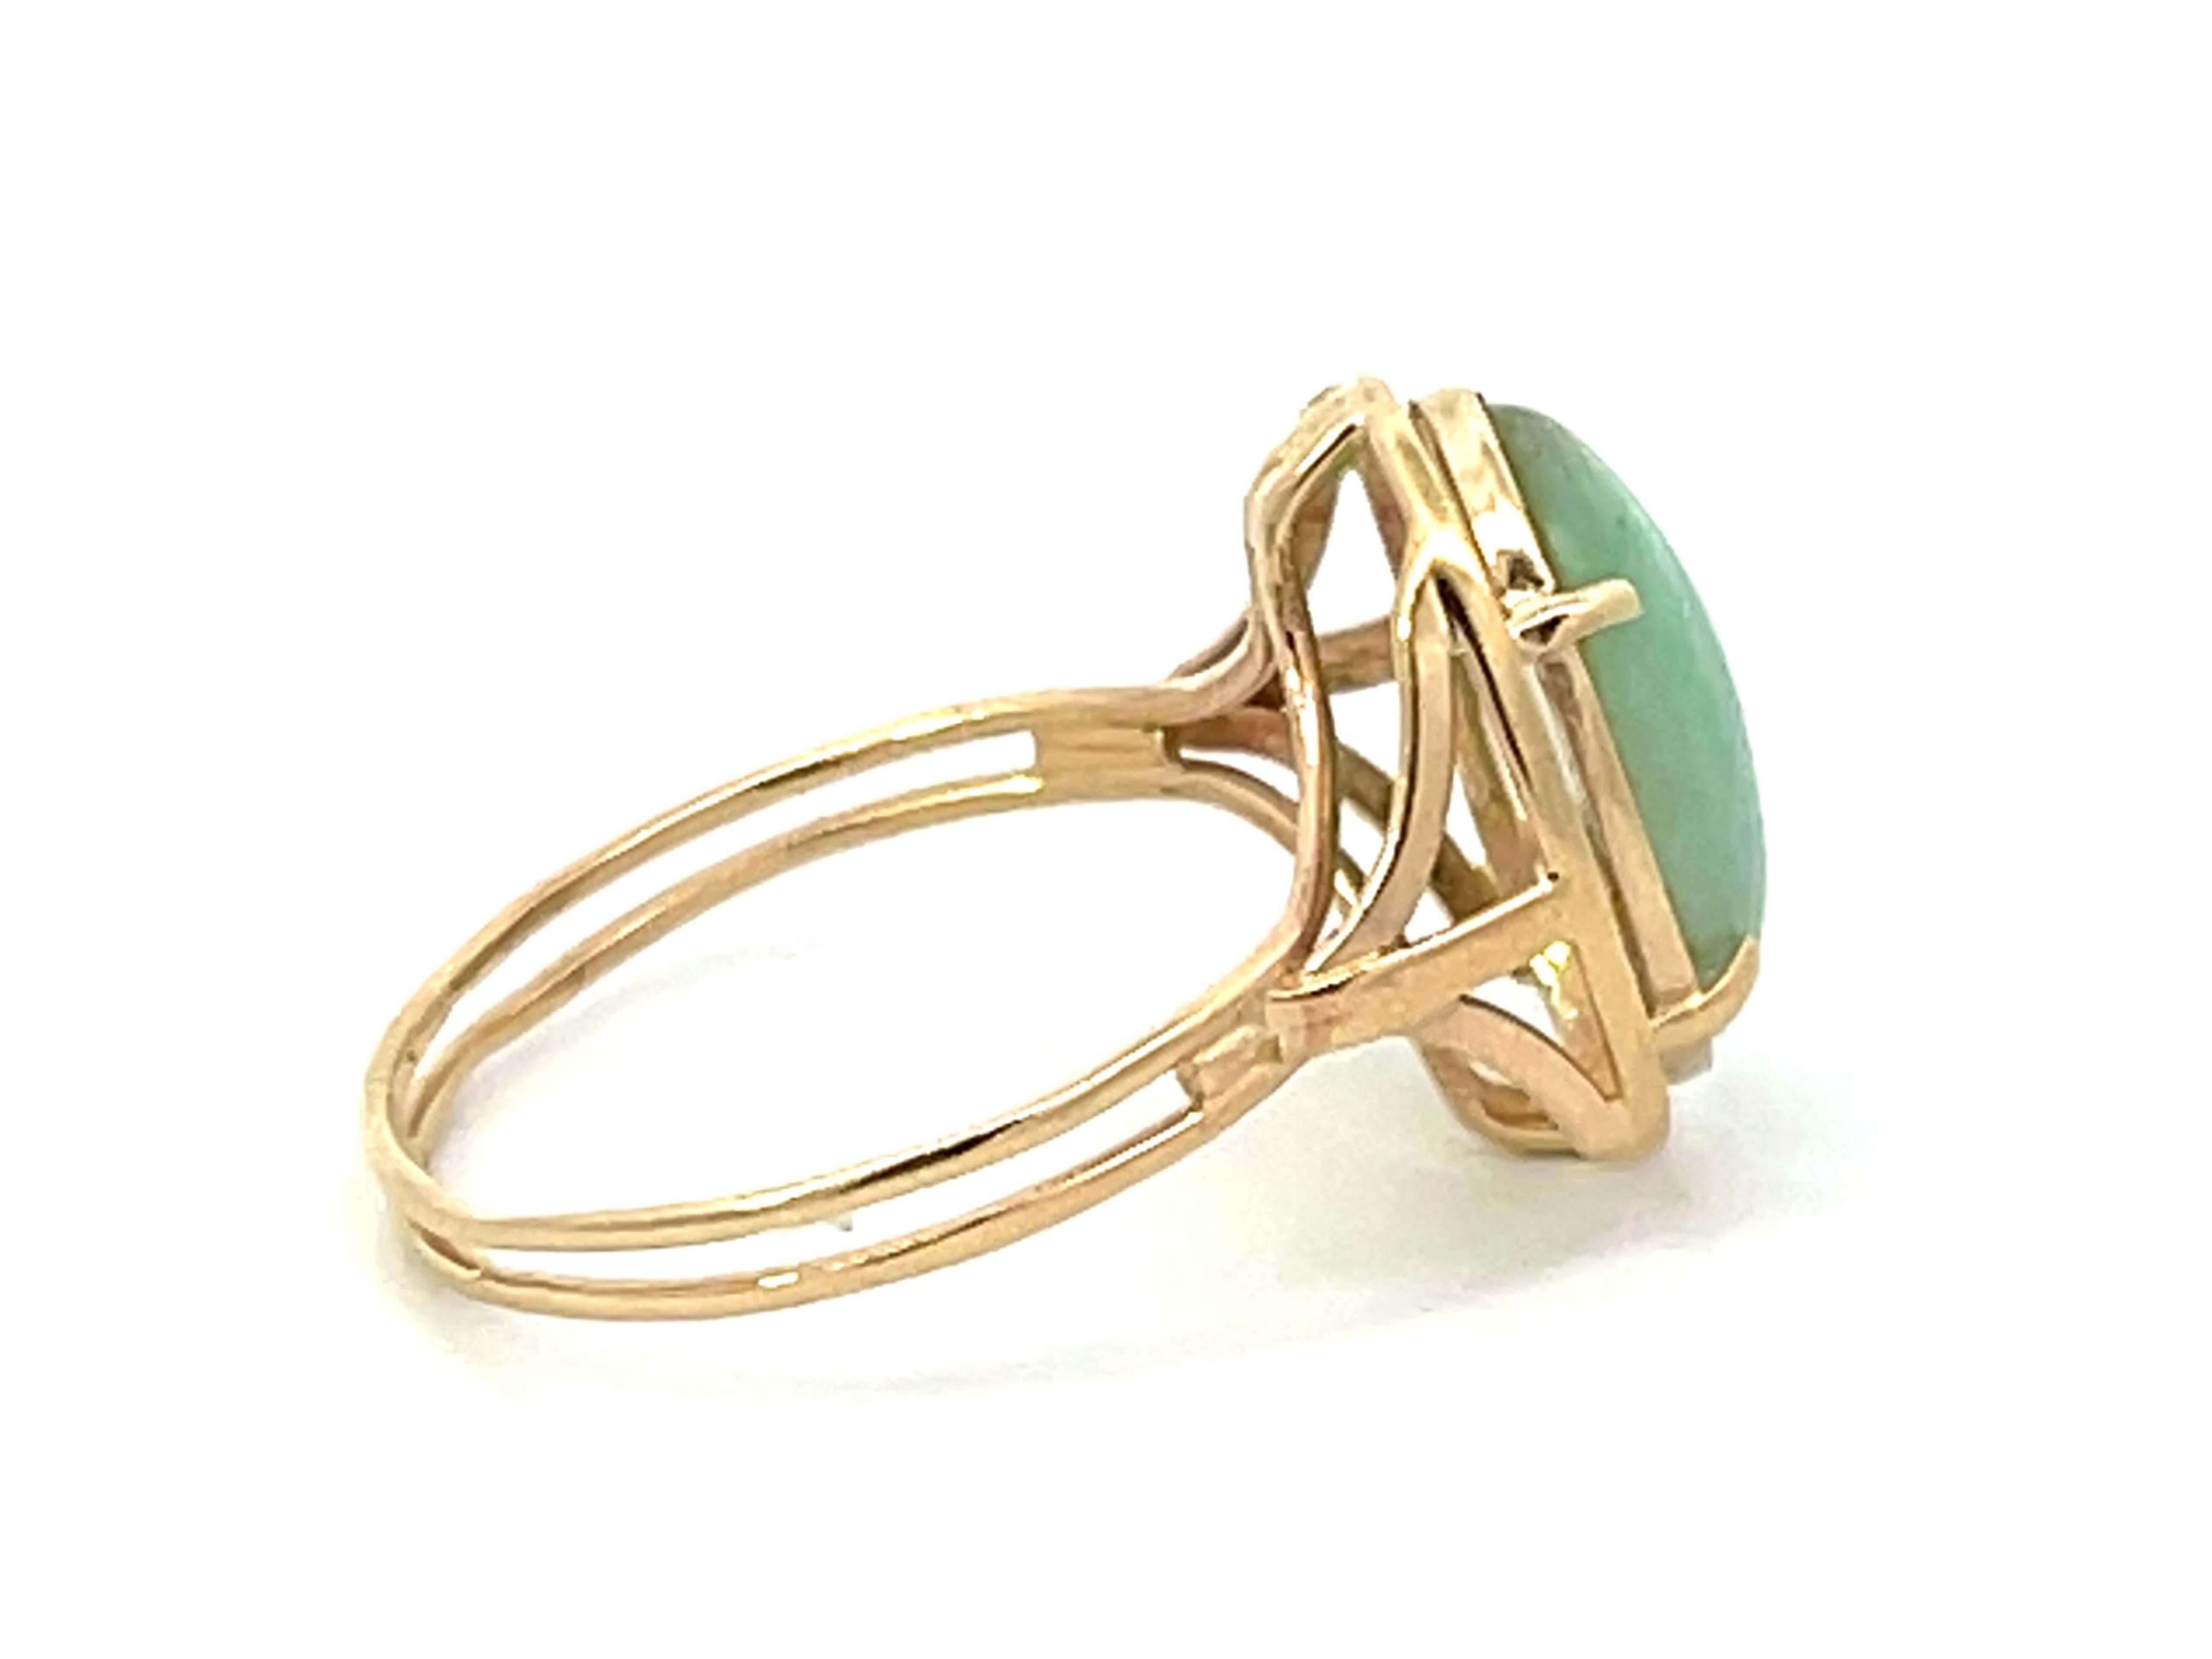 Mings Oval Green Cabochon Jade Ring 14k Yellow Gold In Excellent Condition For Sale In Honolulu, HI